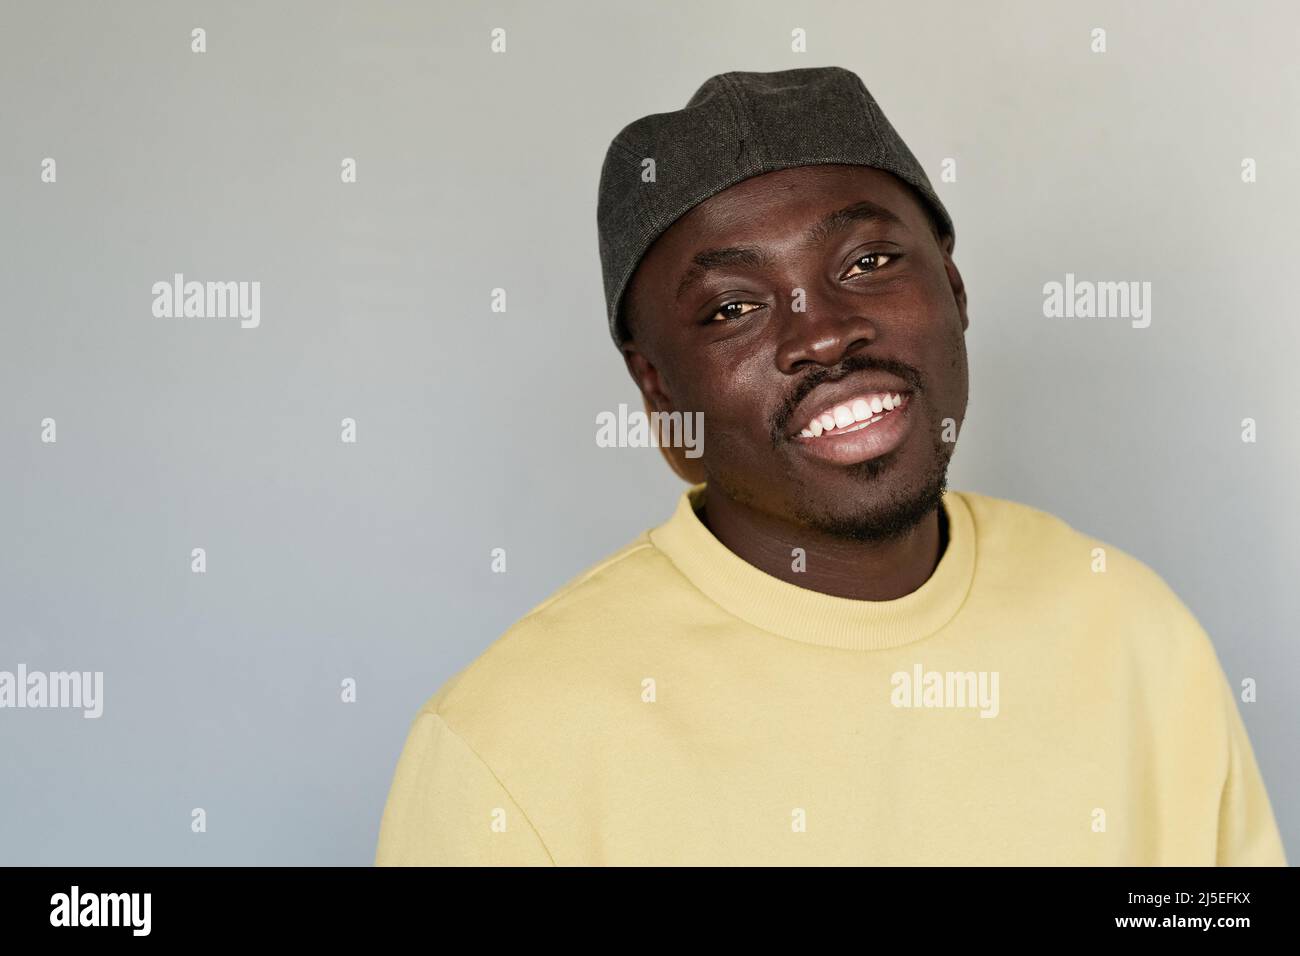 Portrait of happy young black guy in cap and yellow sweatshirt standing against isolated background Stock Photo